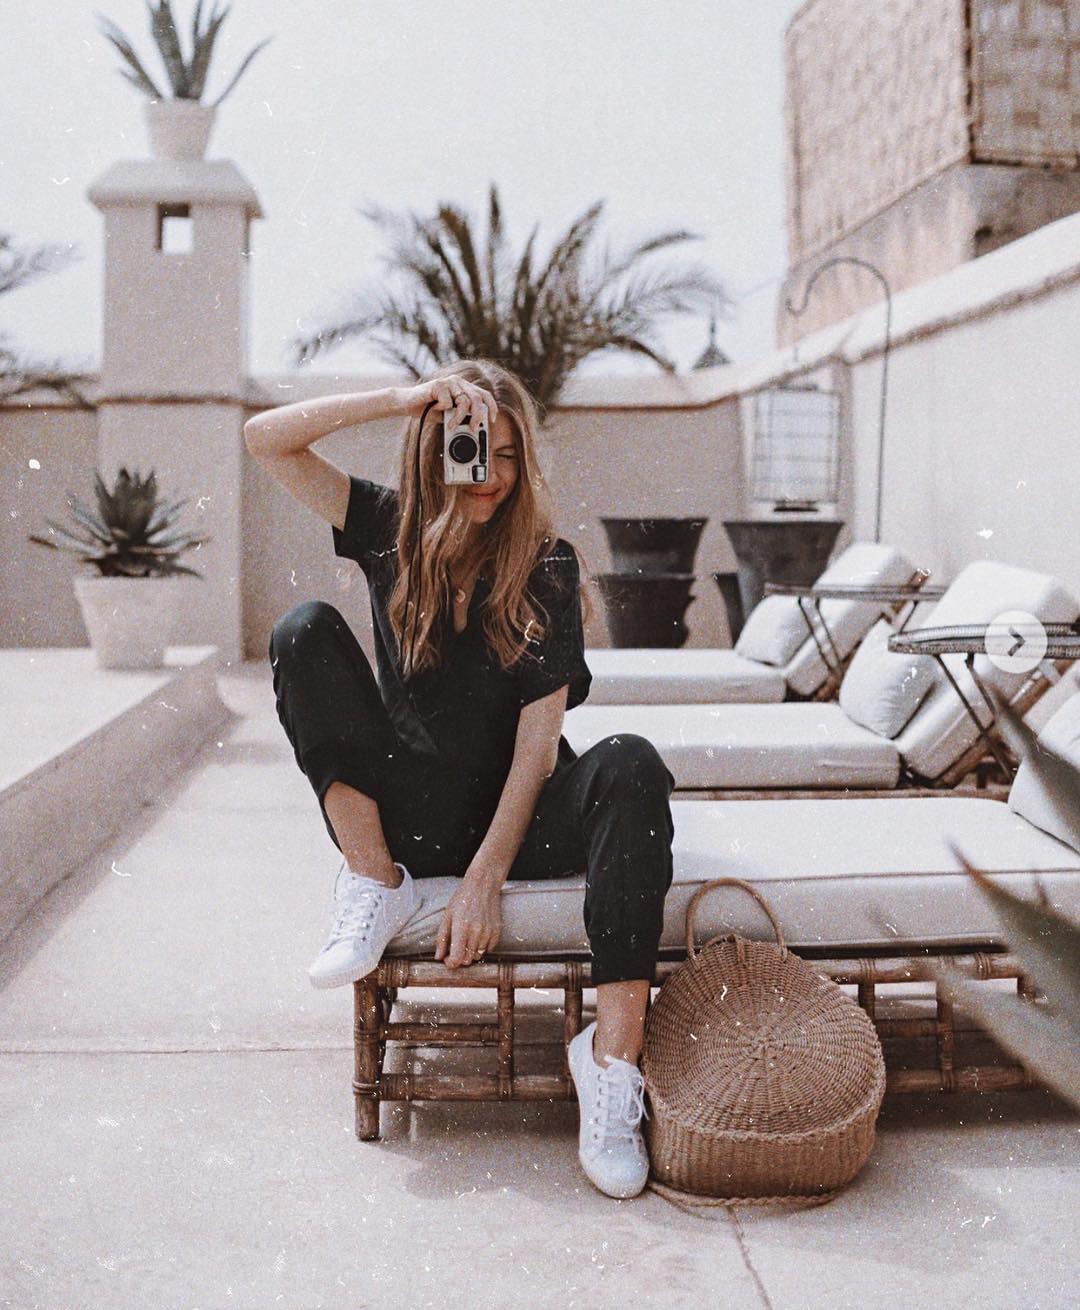 Cargo Jumpsuit In Black And White
Sneakers For Summer